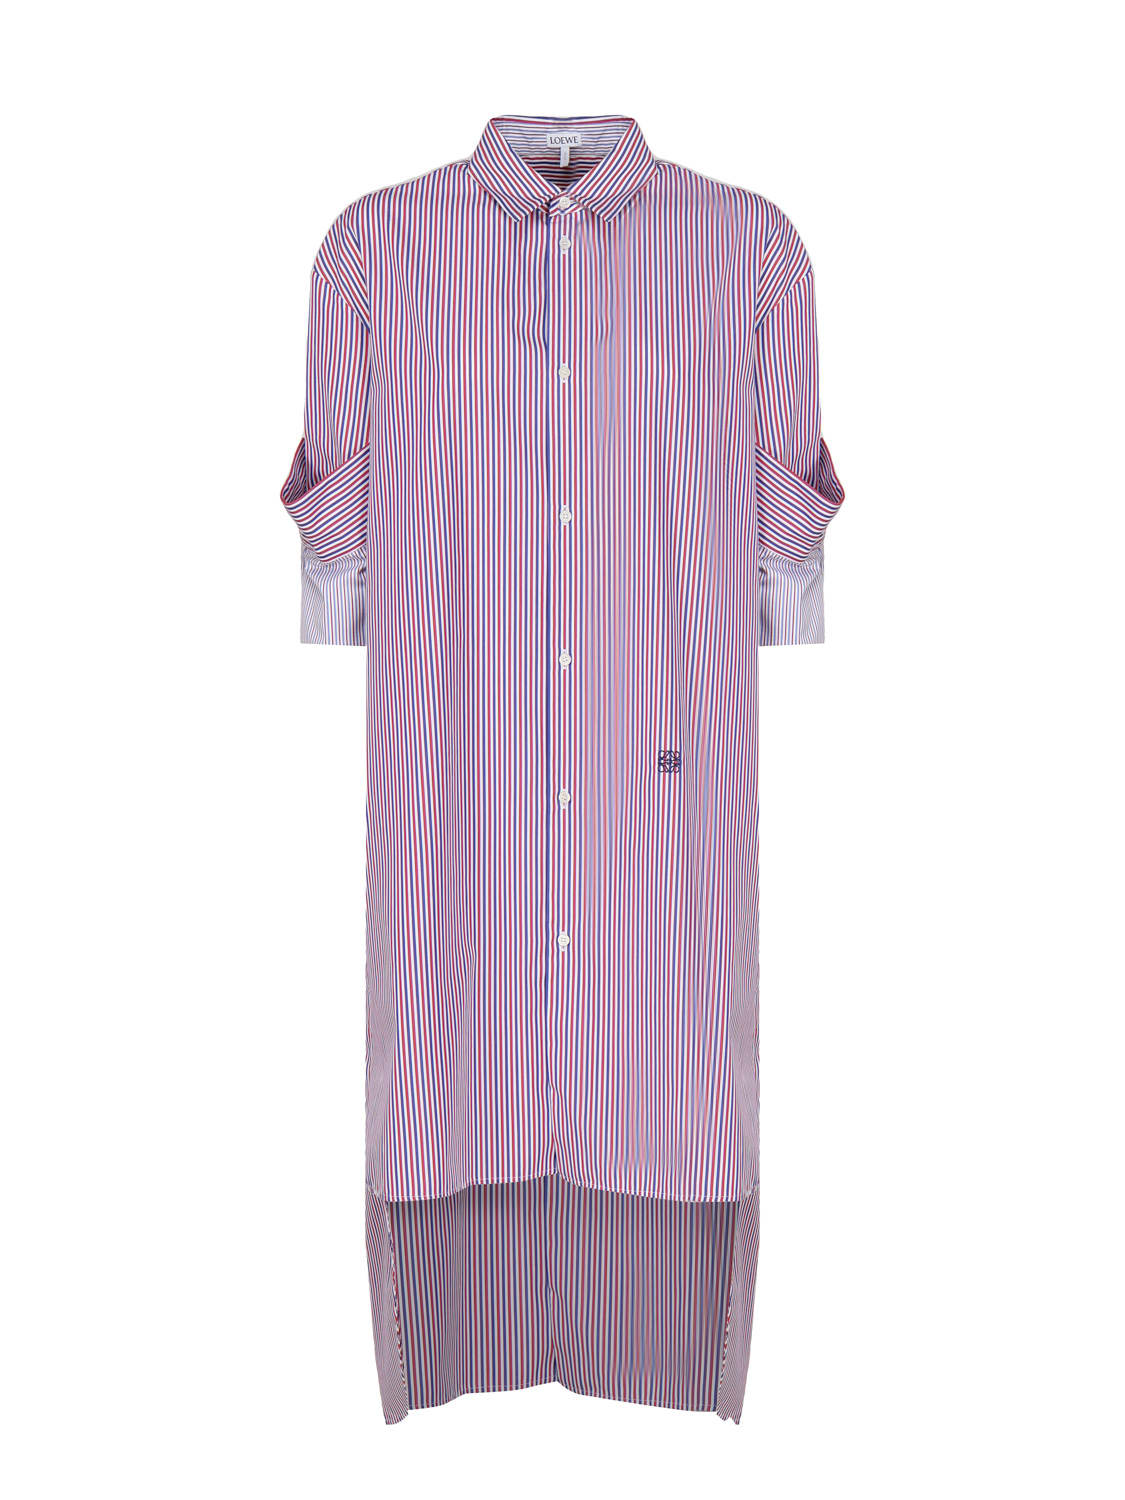 LOEWE SHIRT DRESS WITH LAPEL IN STRIPED COTTON